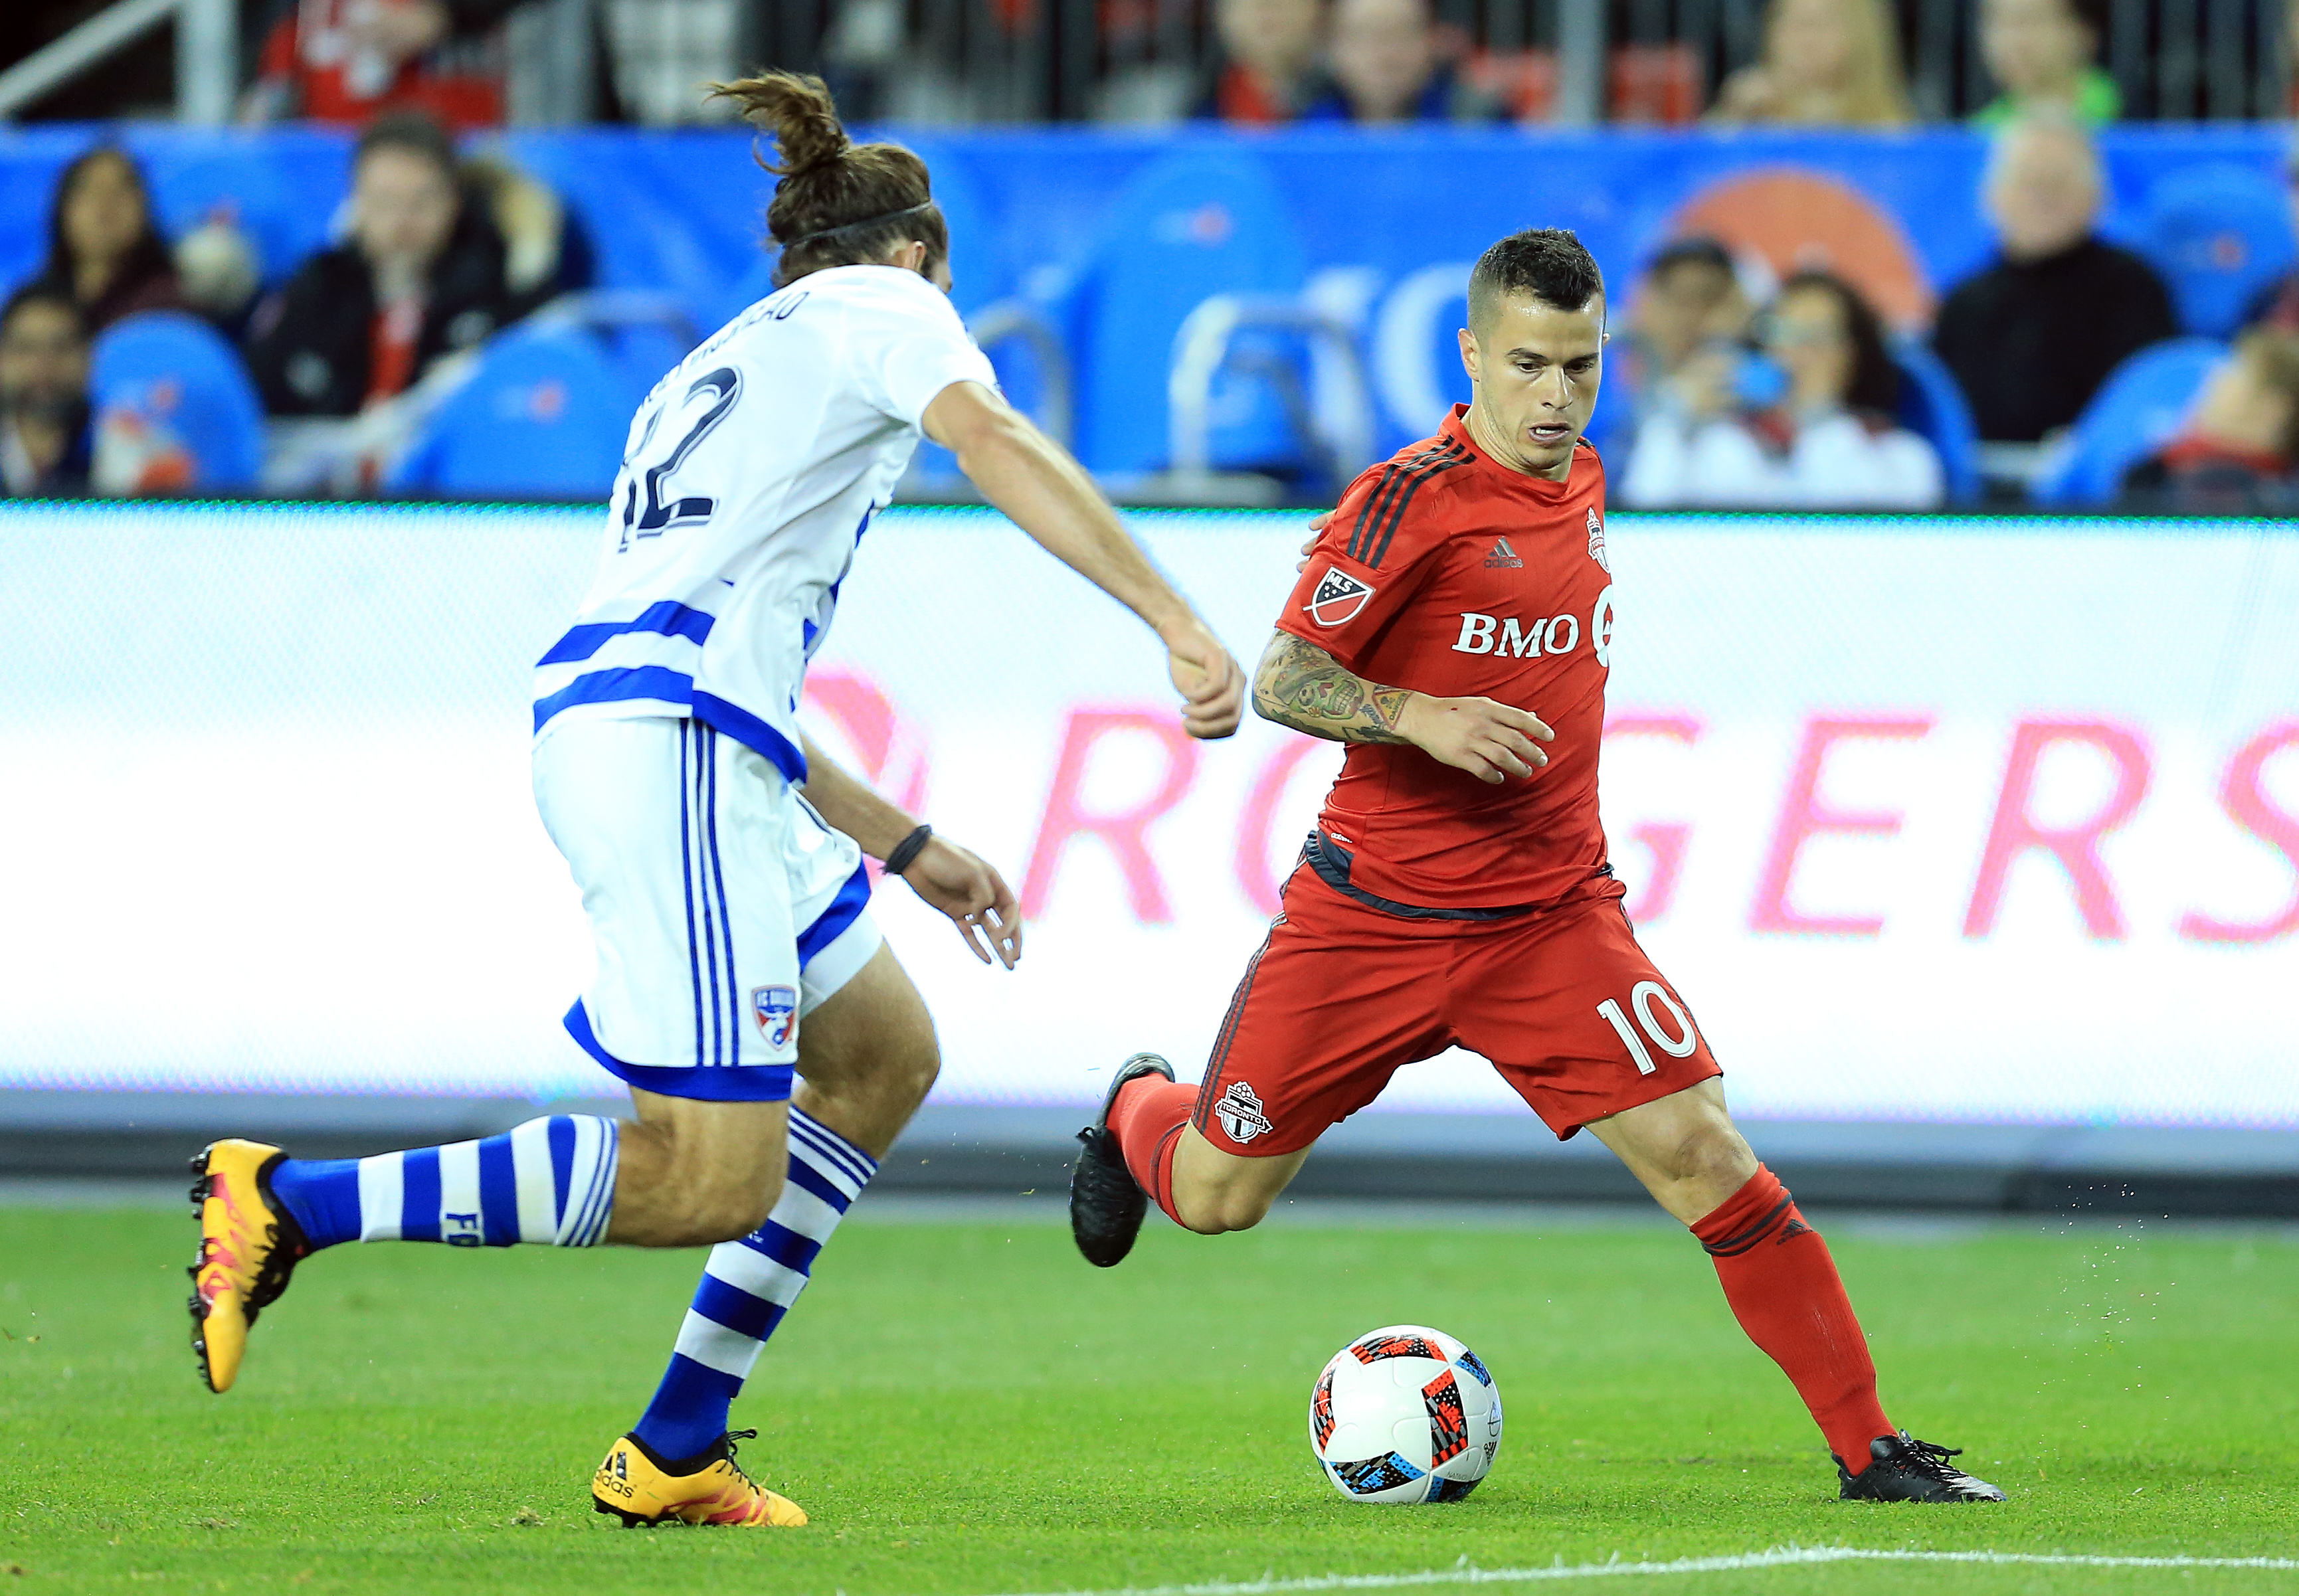 TORONTO, ON - MAY 07: Sebastian Giovinco #10 of Toronto FC battles for the ball with Ryan Hollingshead #12 of FC Dallas during the second half of an MLS soccer game at BMO Field on May 7, 2016 in Toronto, Ontario, Canada. (Photo by Vaughn Ridley/Getty Images)